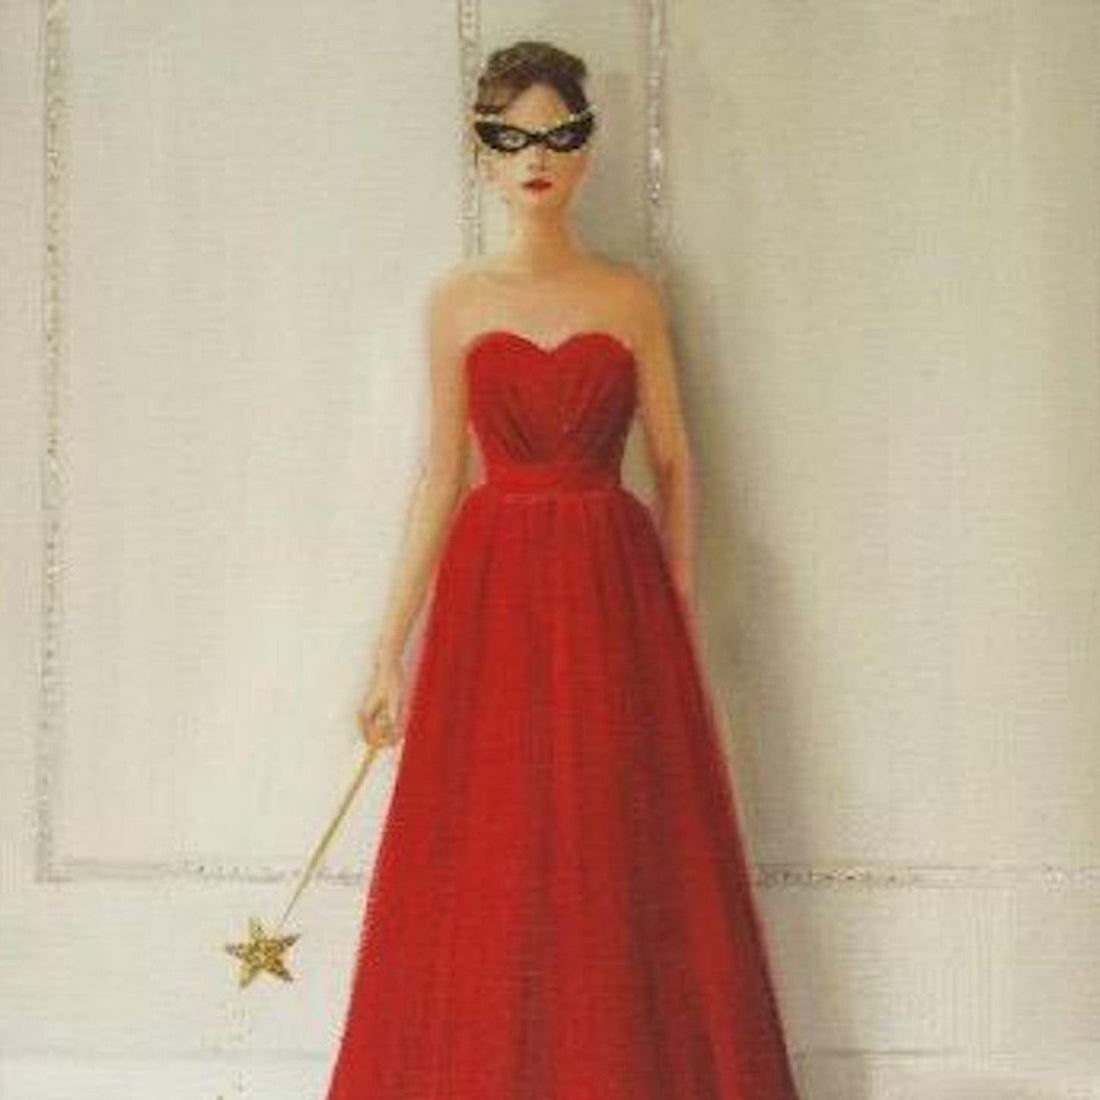 Woman in a red strapless dress wearing sunglasses and holding the Fairy Godmother Small Art Print wand, rendered by Canadian fine artist Janet Hill on heavyweight matte fine art paper.